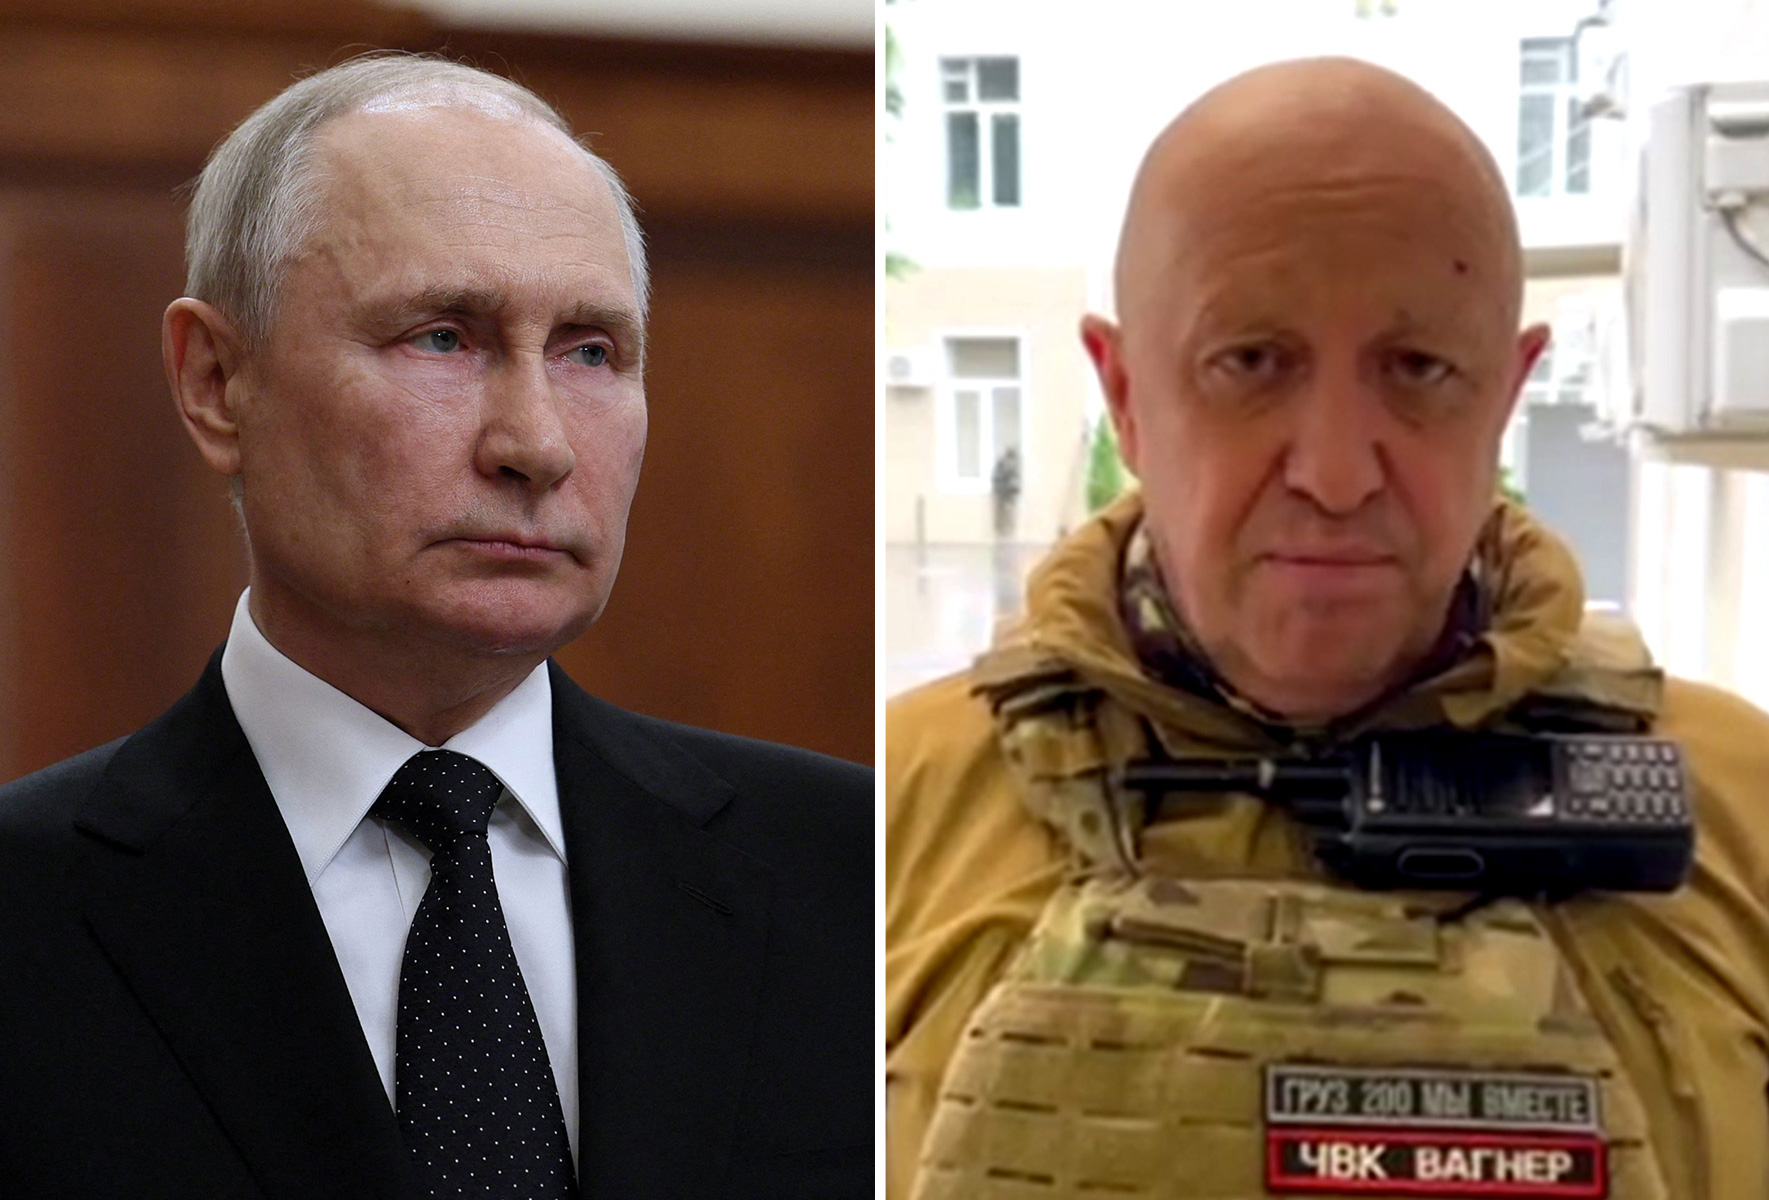 Putin wants to kill Prigozhin, offers Wagner fighters amnesty: Reports